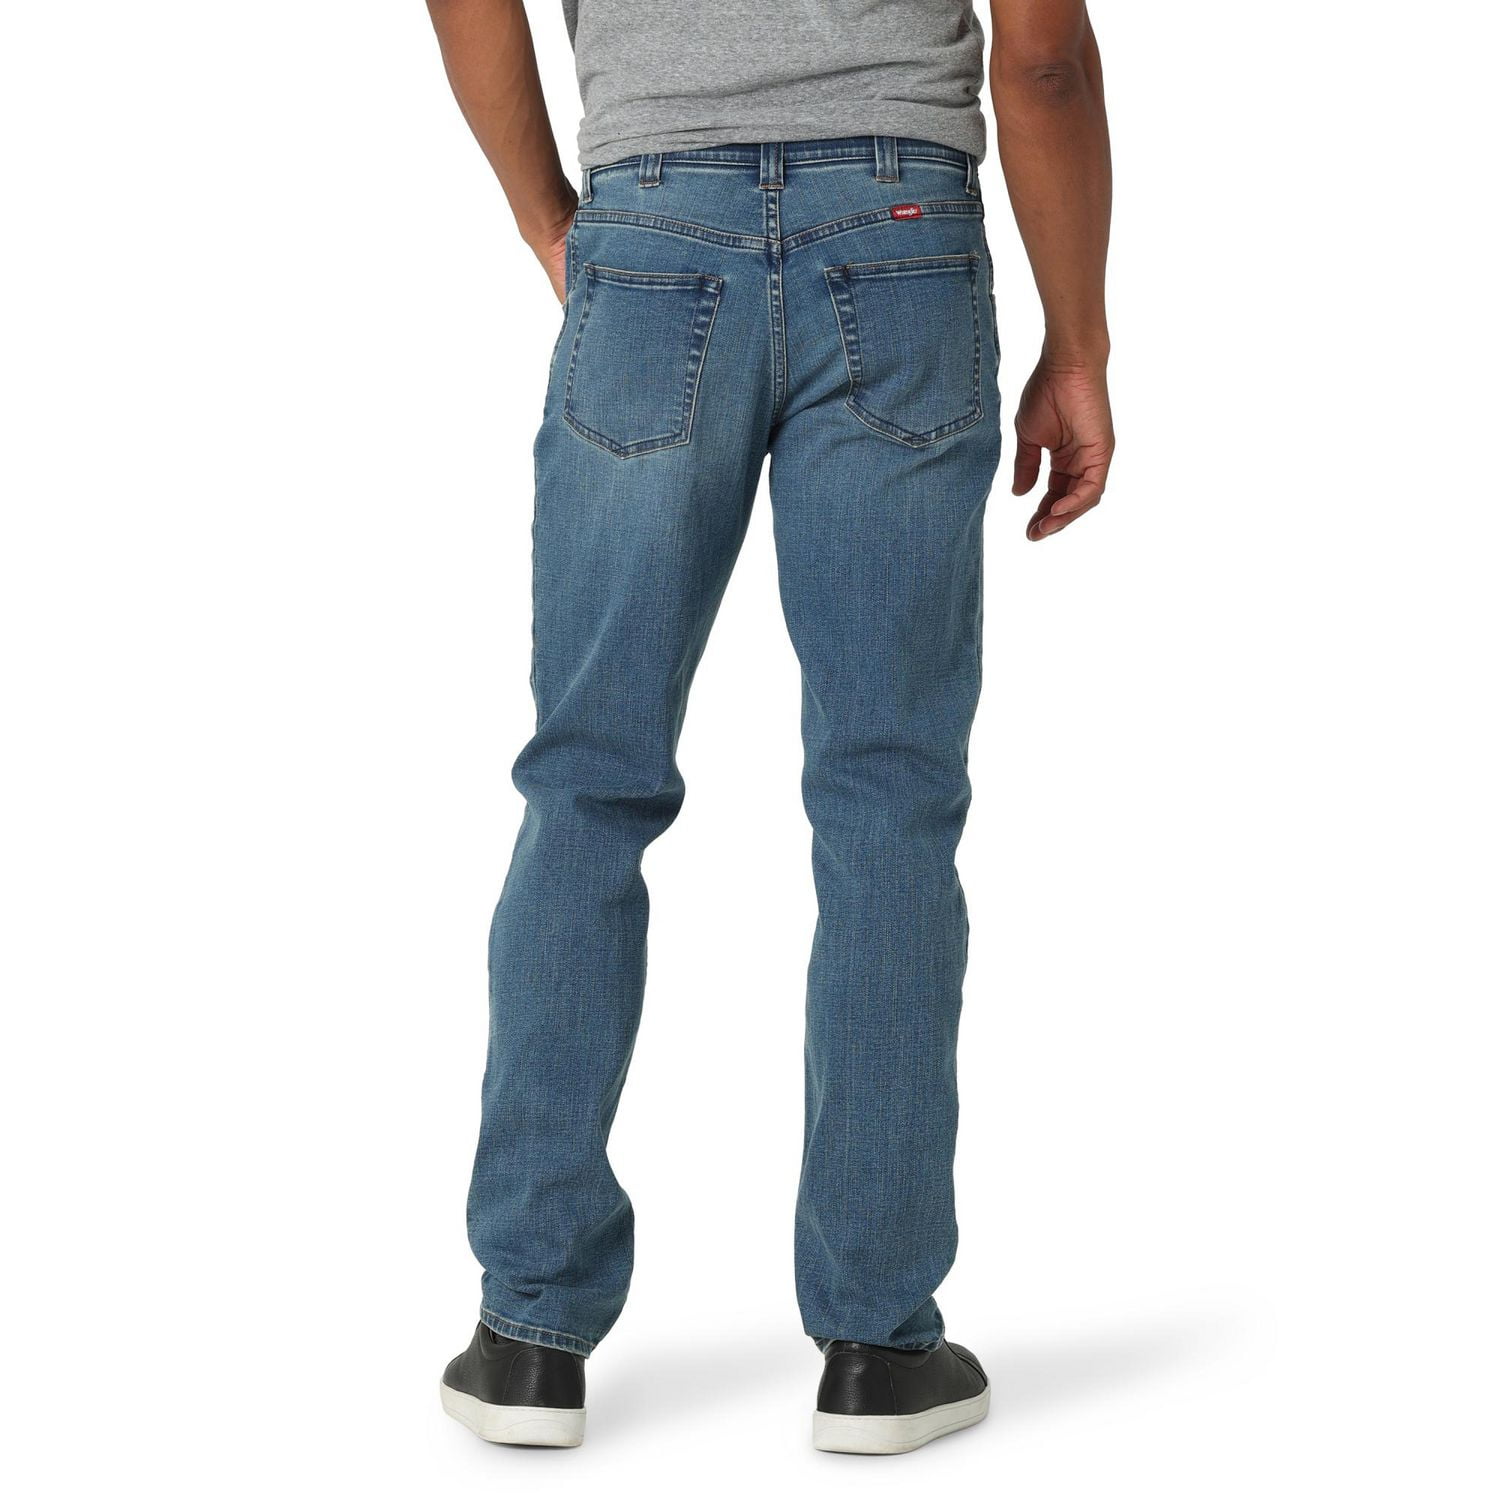 Faded Glory Men's Jeans Only $7 at Walmart